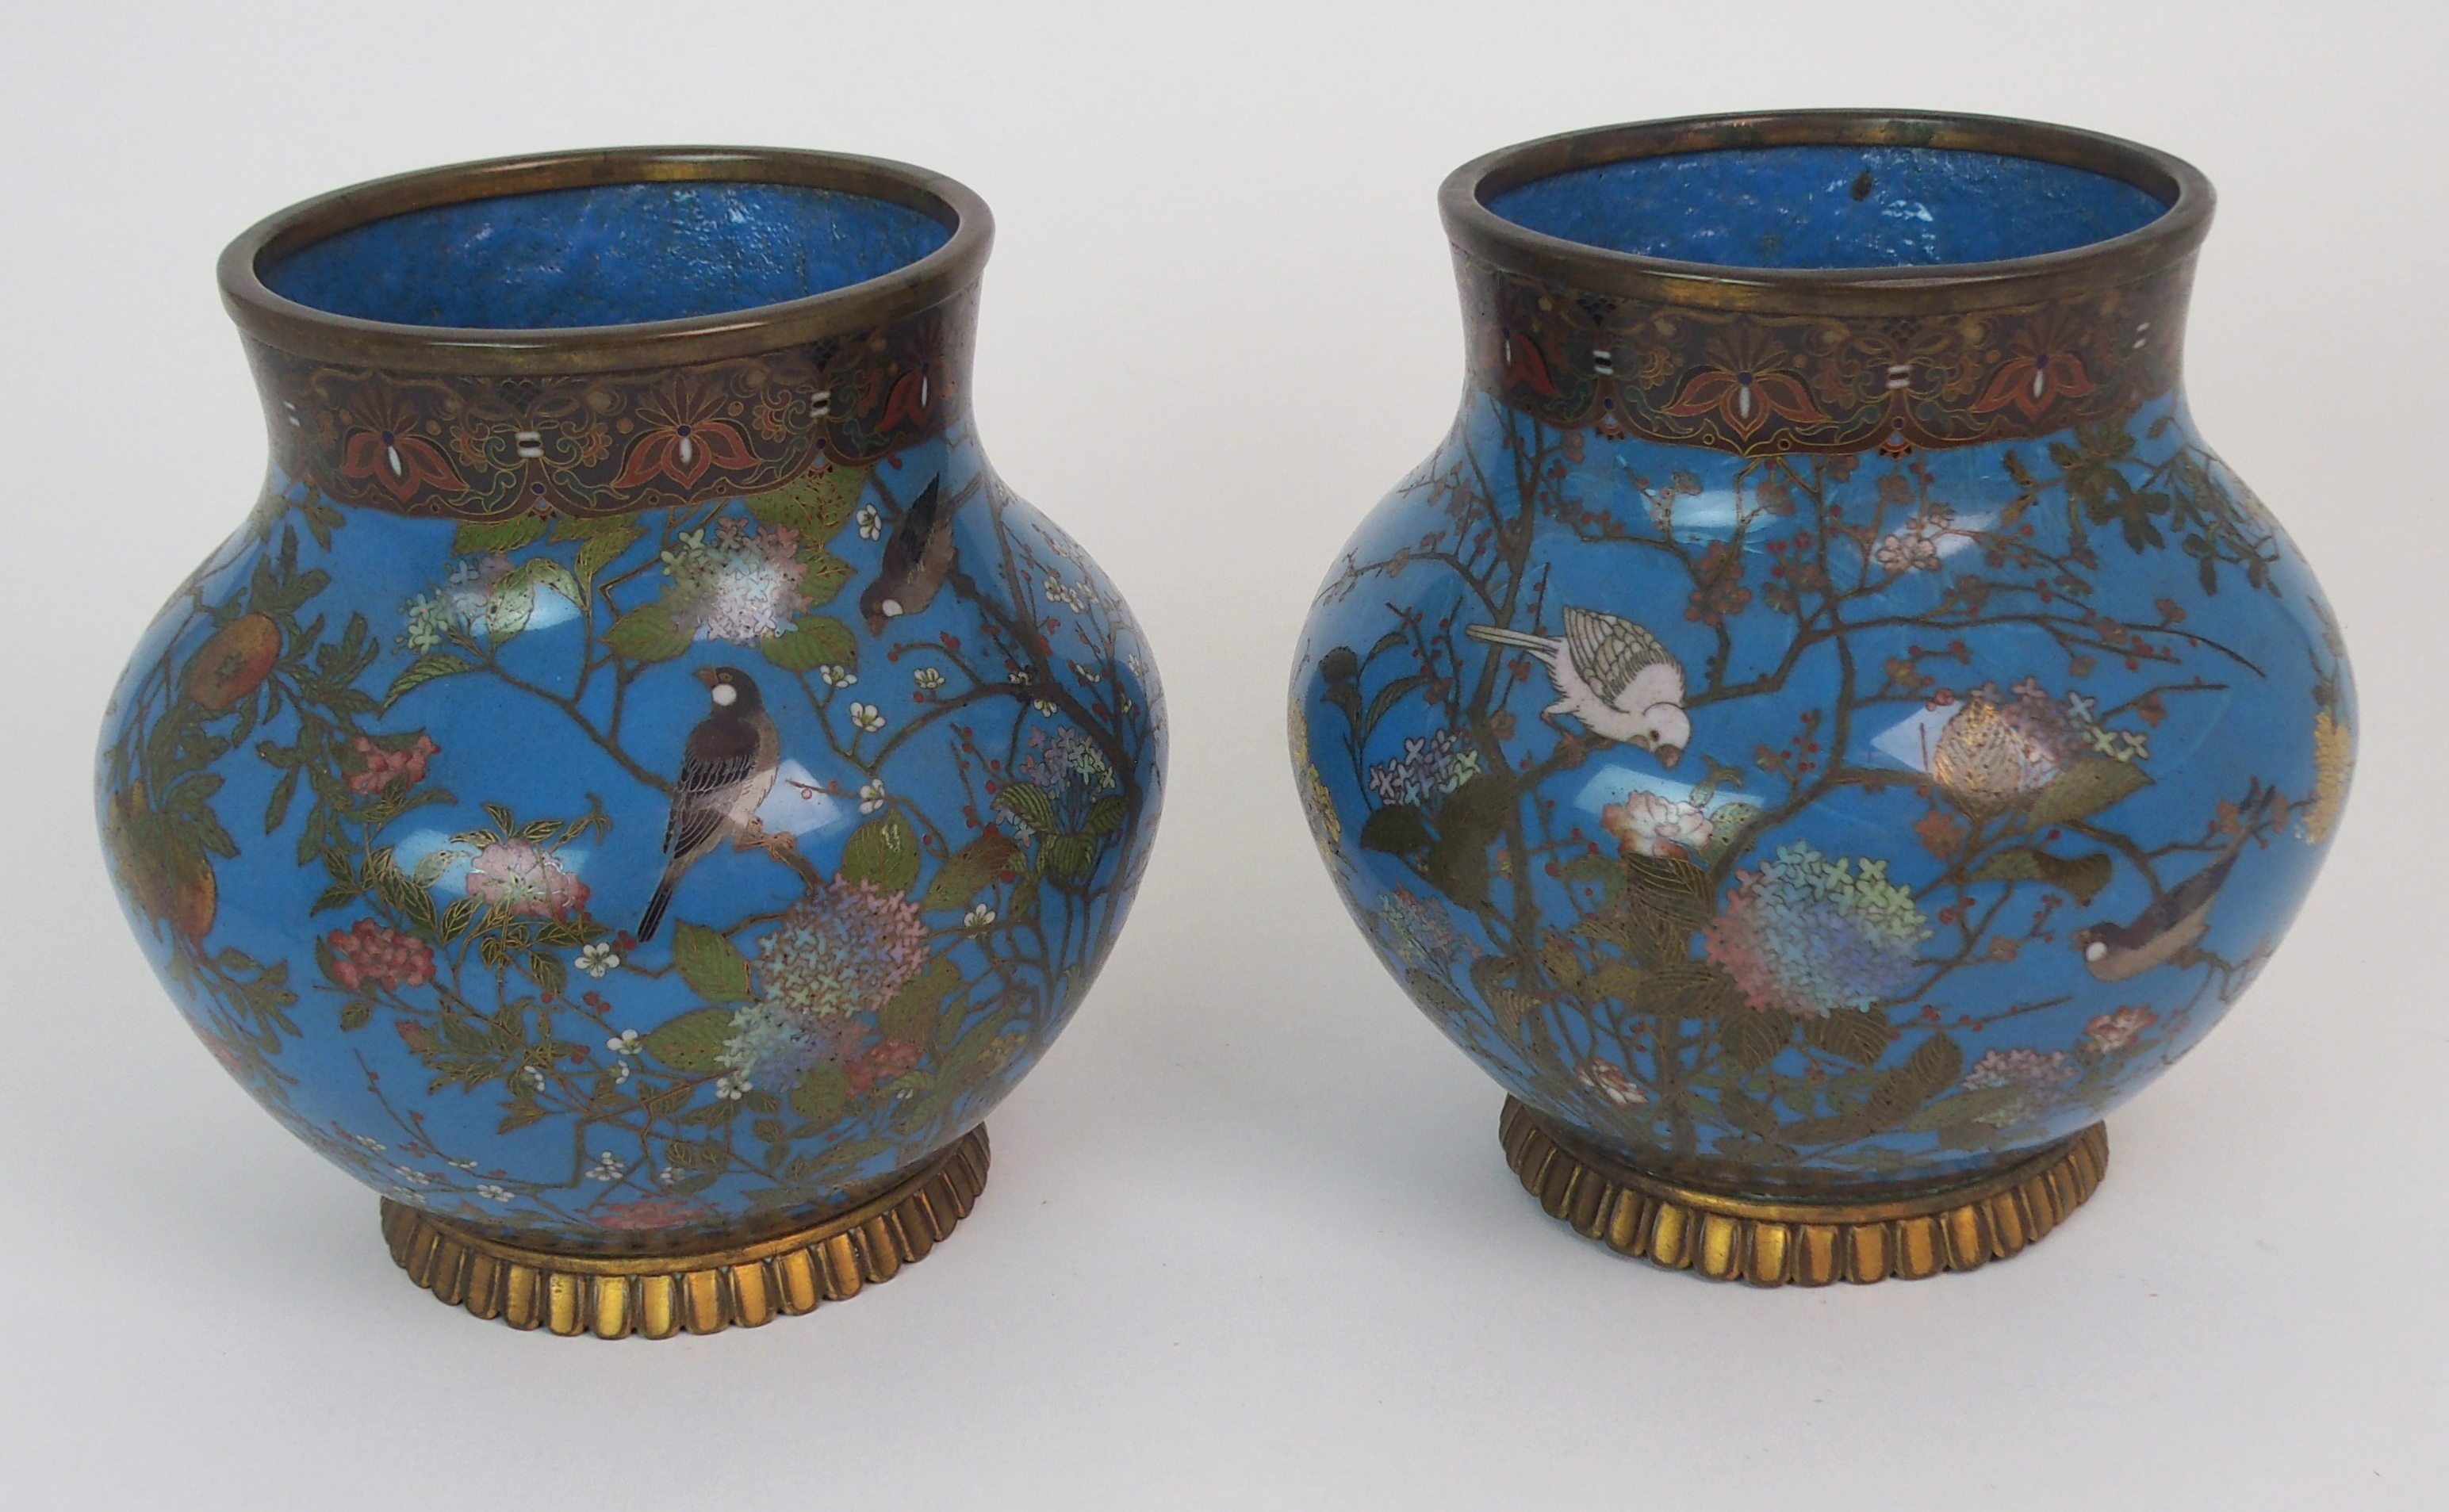 A PAIR OF CLOISONNE GLOBULAR VASES decorated with birds in flowering branches on a blue ground and